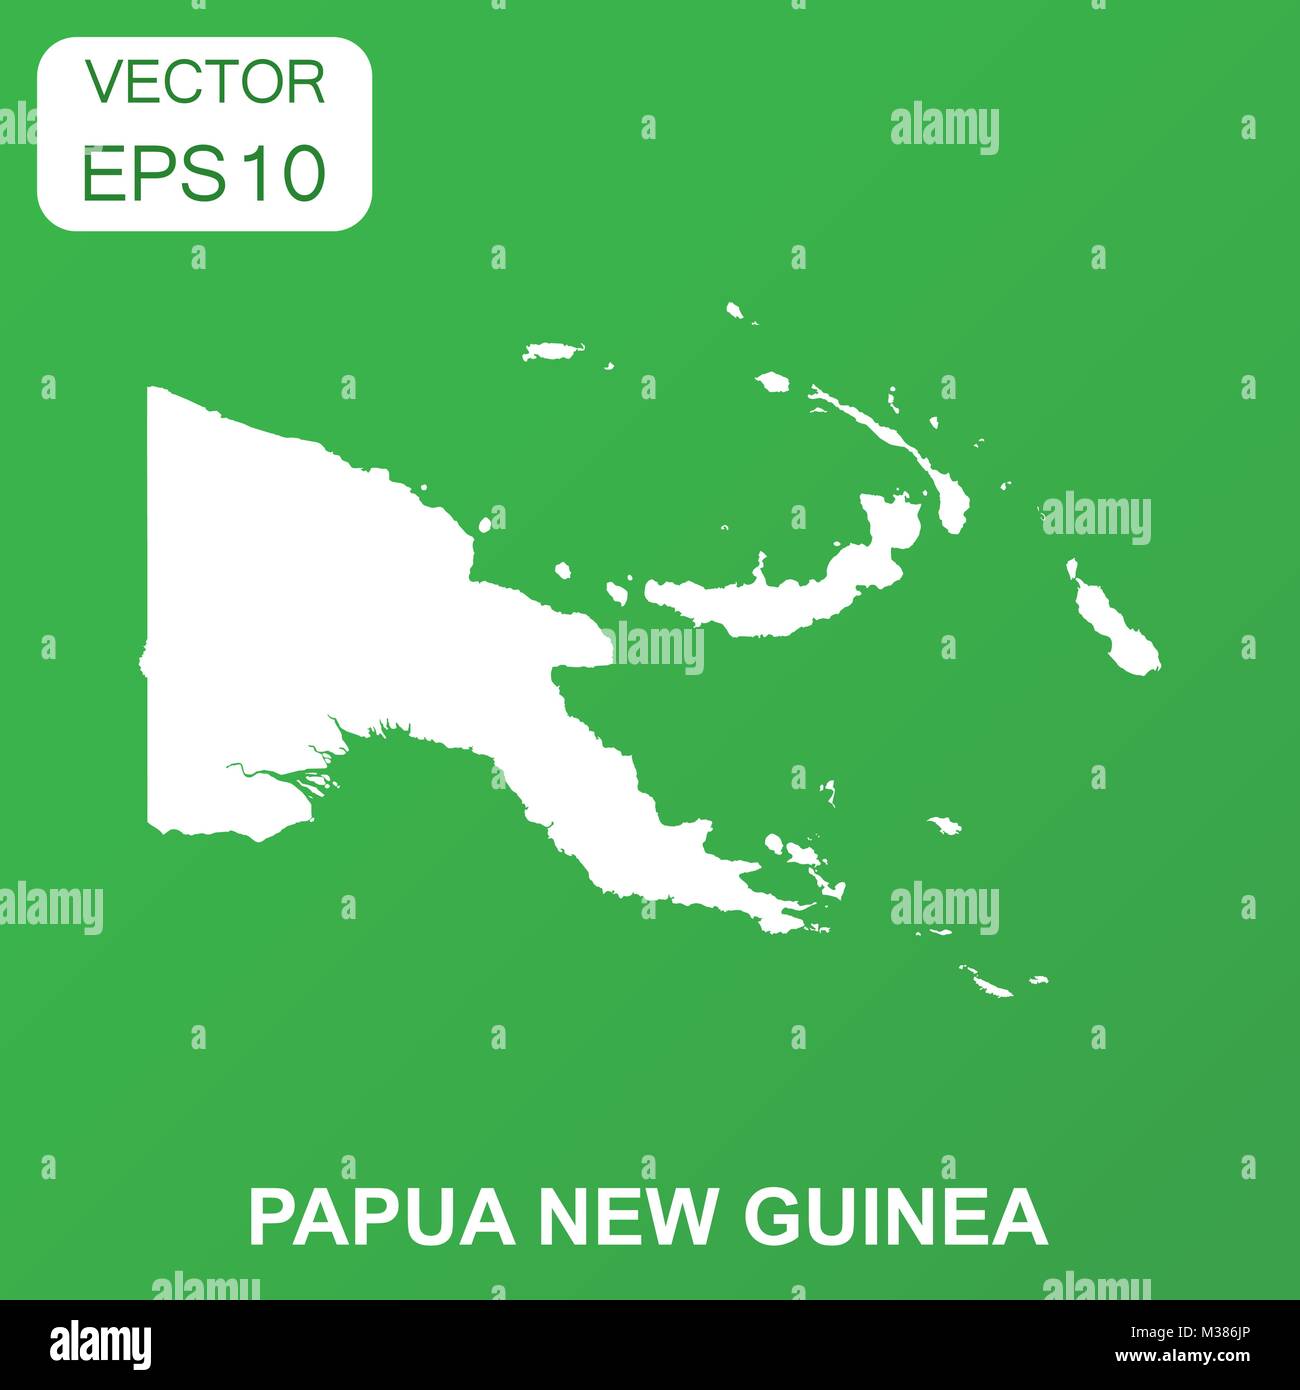 Papua New Guinea map icon. Business concept Guinea pictogram. Vector illustration on green background. Stock Vector